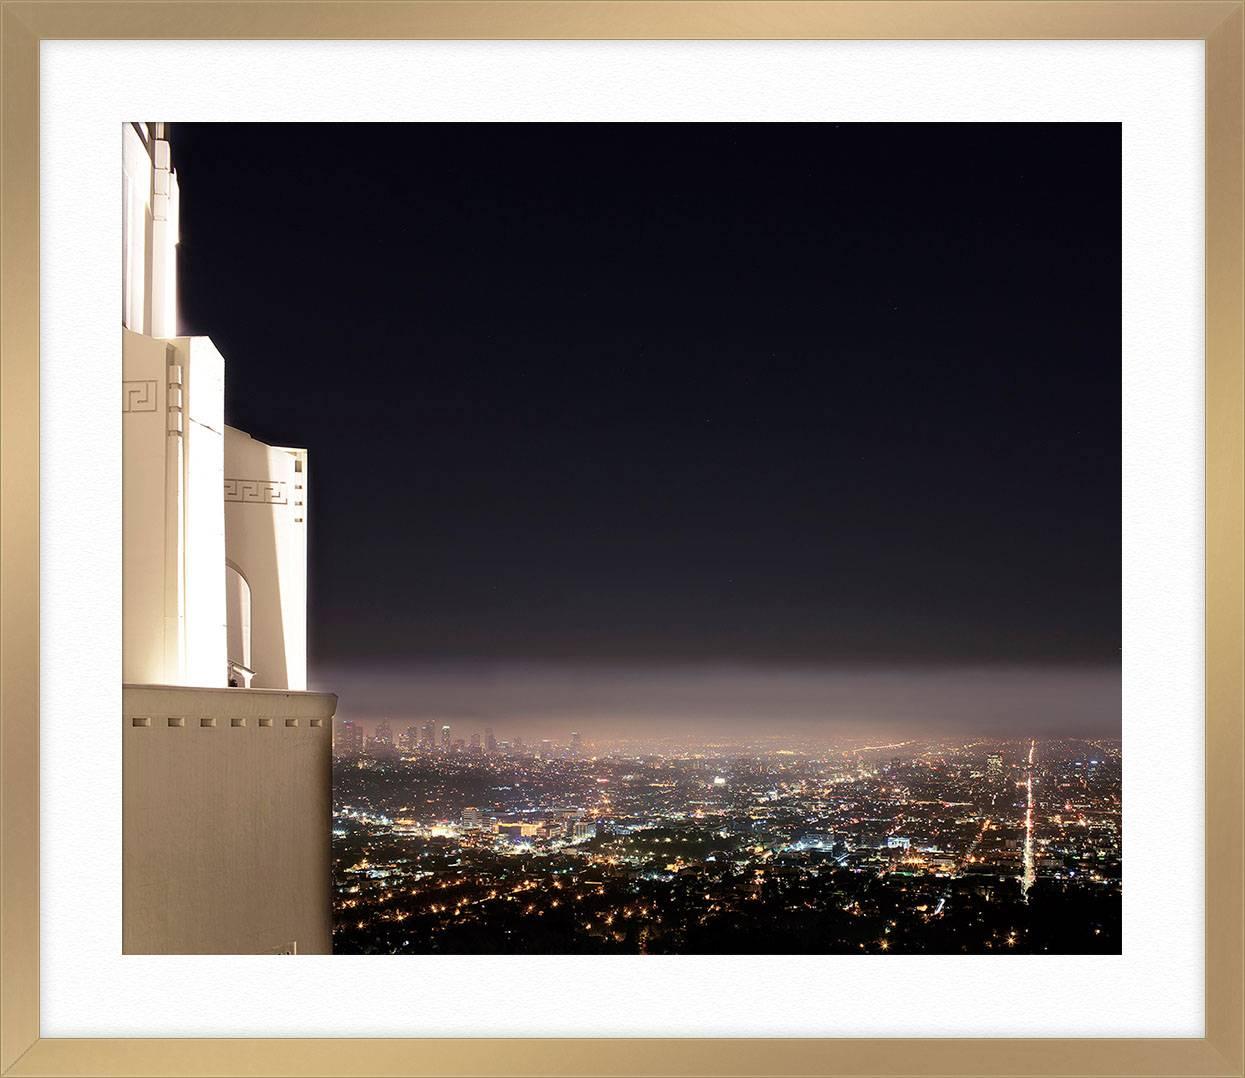 Los Angeles, Griffith Observatory 2 4